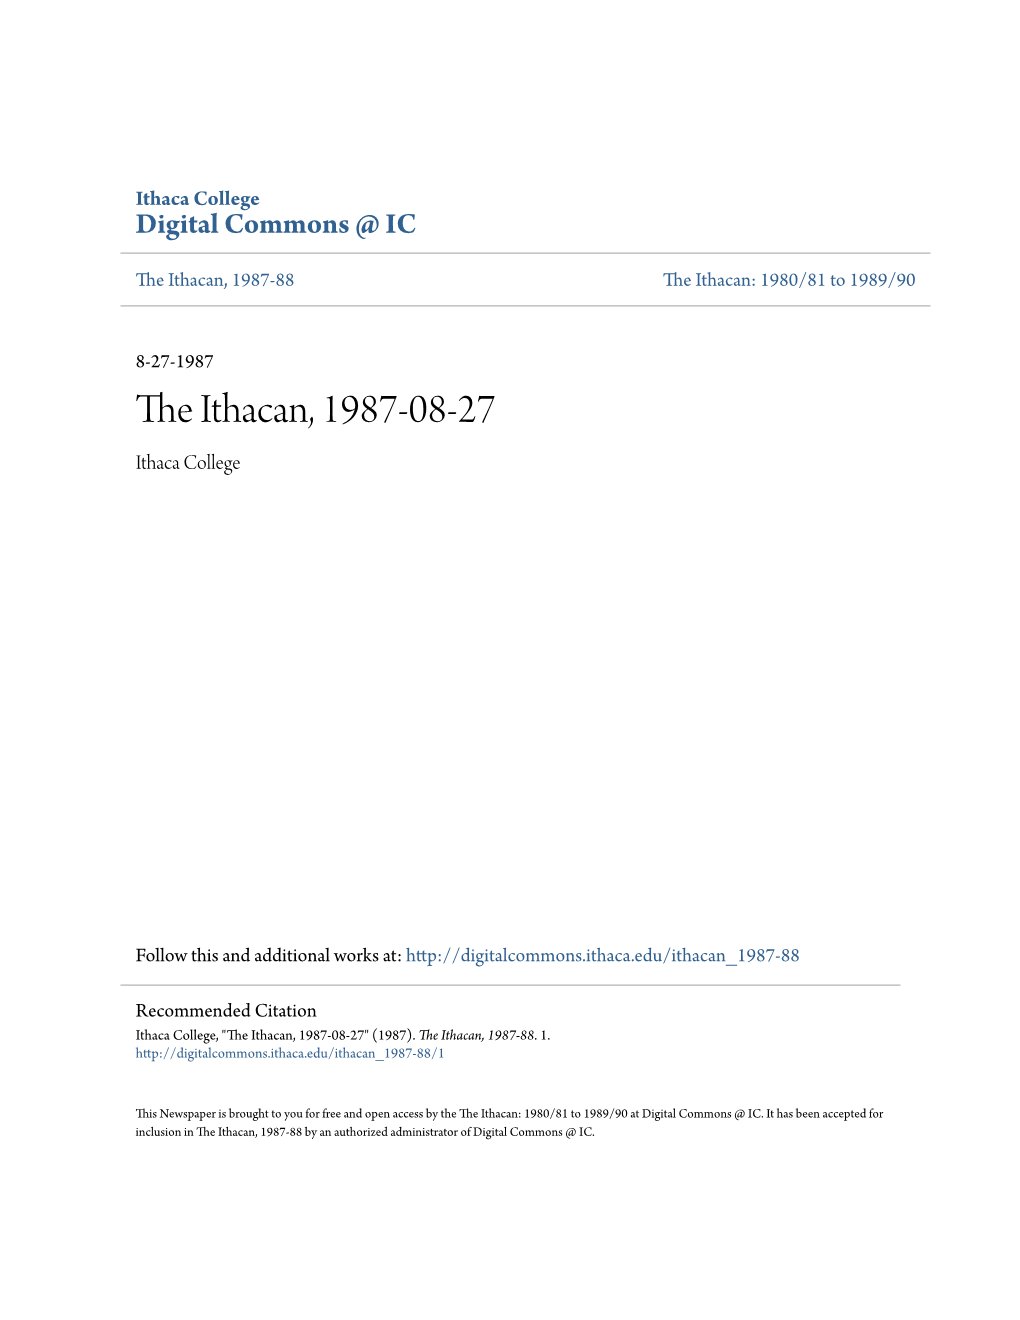 The Ithacan, 1987-08-27